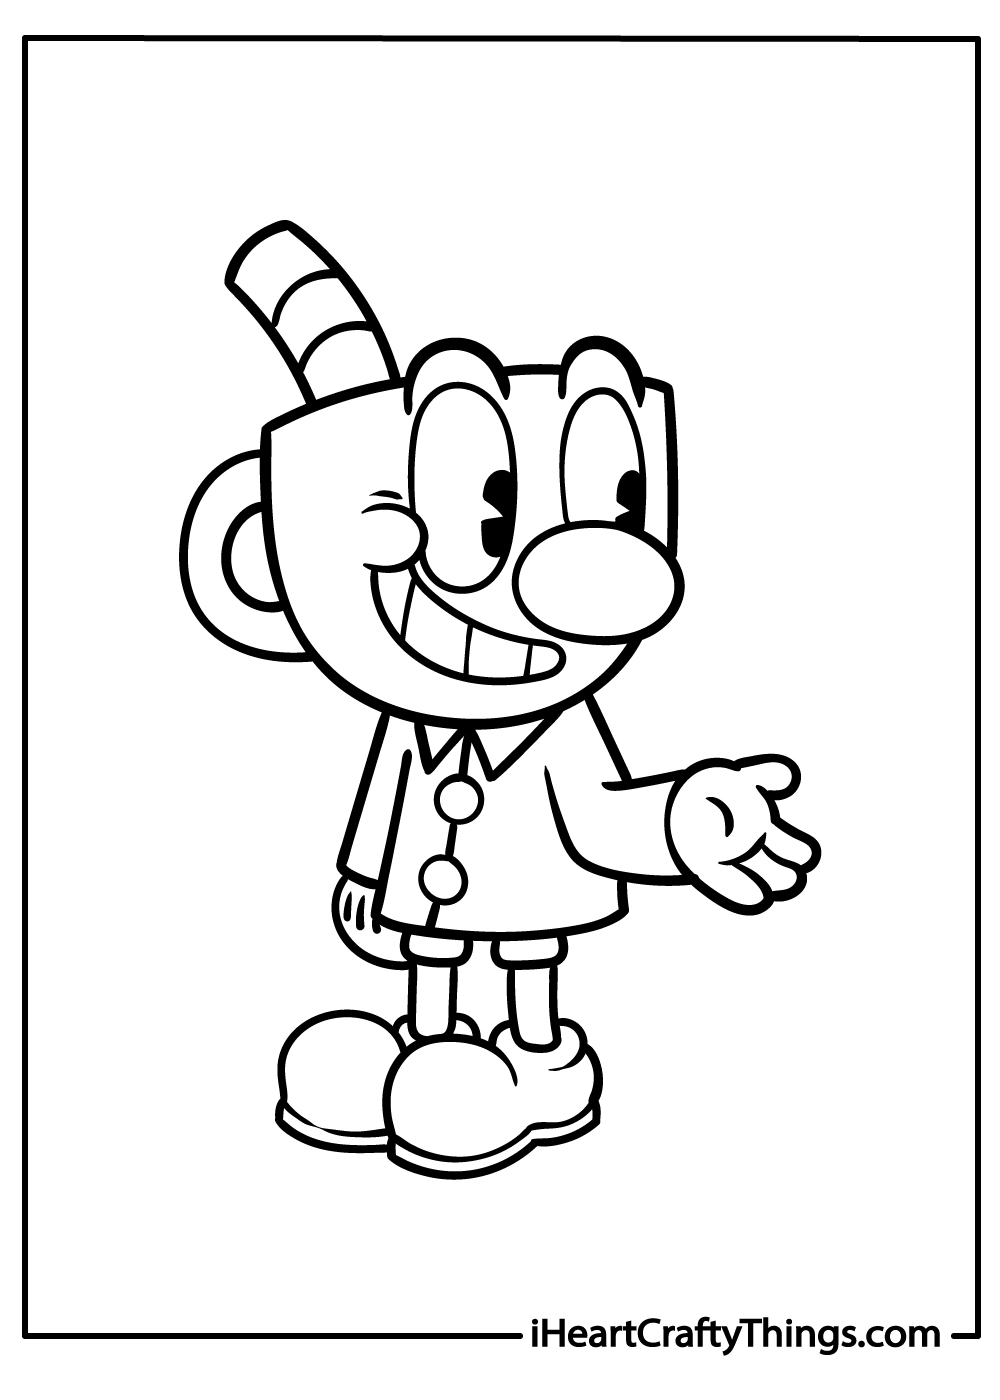 Cuphead Coloring Pages for Adults